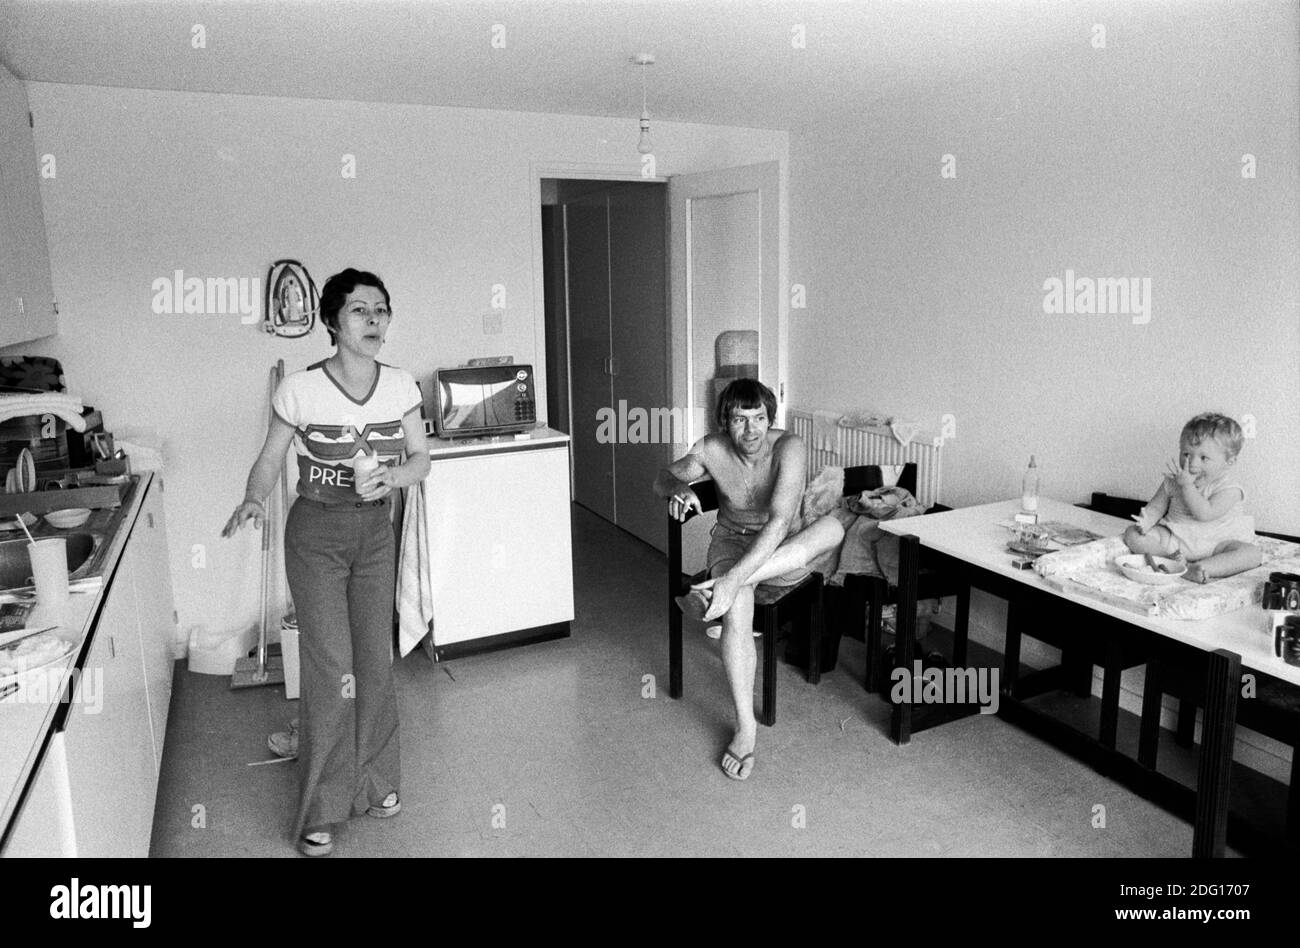 Modern living 1970s working class family life, mother, father and baby who is sitting on the kitchen table in the kitchen of their three bedroom home on a new modern housing development new town England 1977 Note the iron on the wall out of the way behind the woman's head. HOMER SYKES. Stock Photo